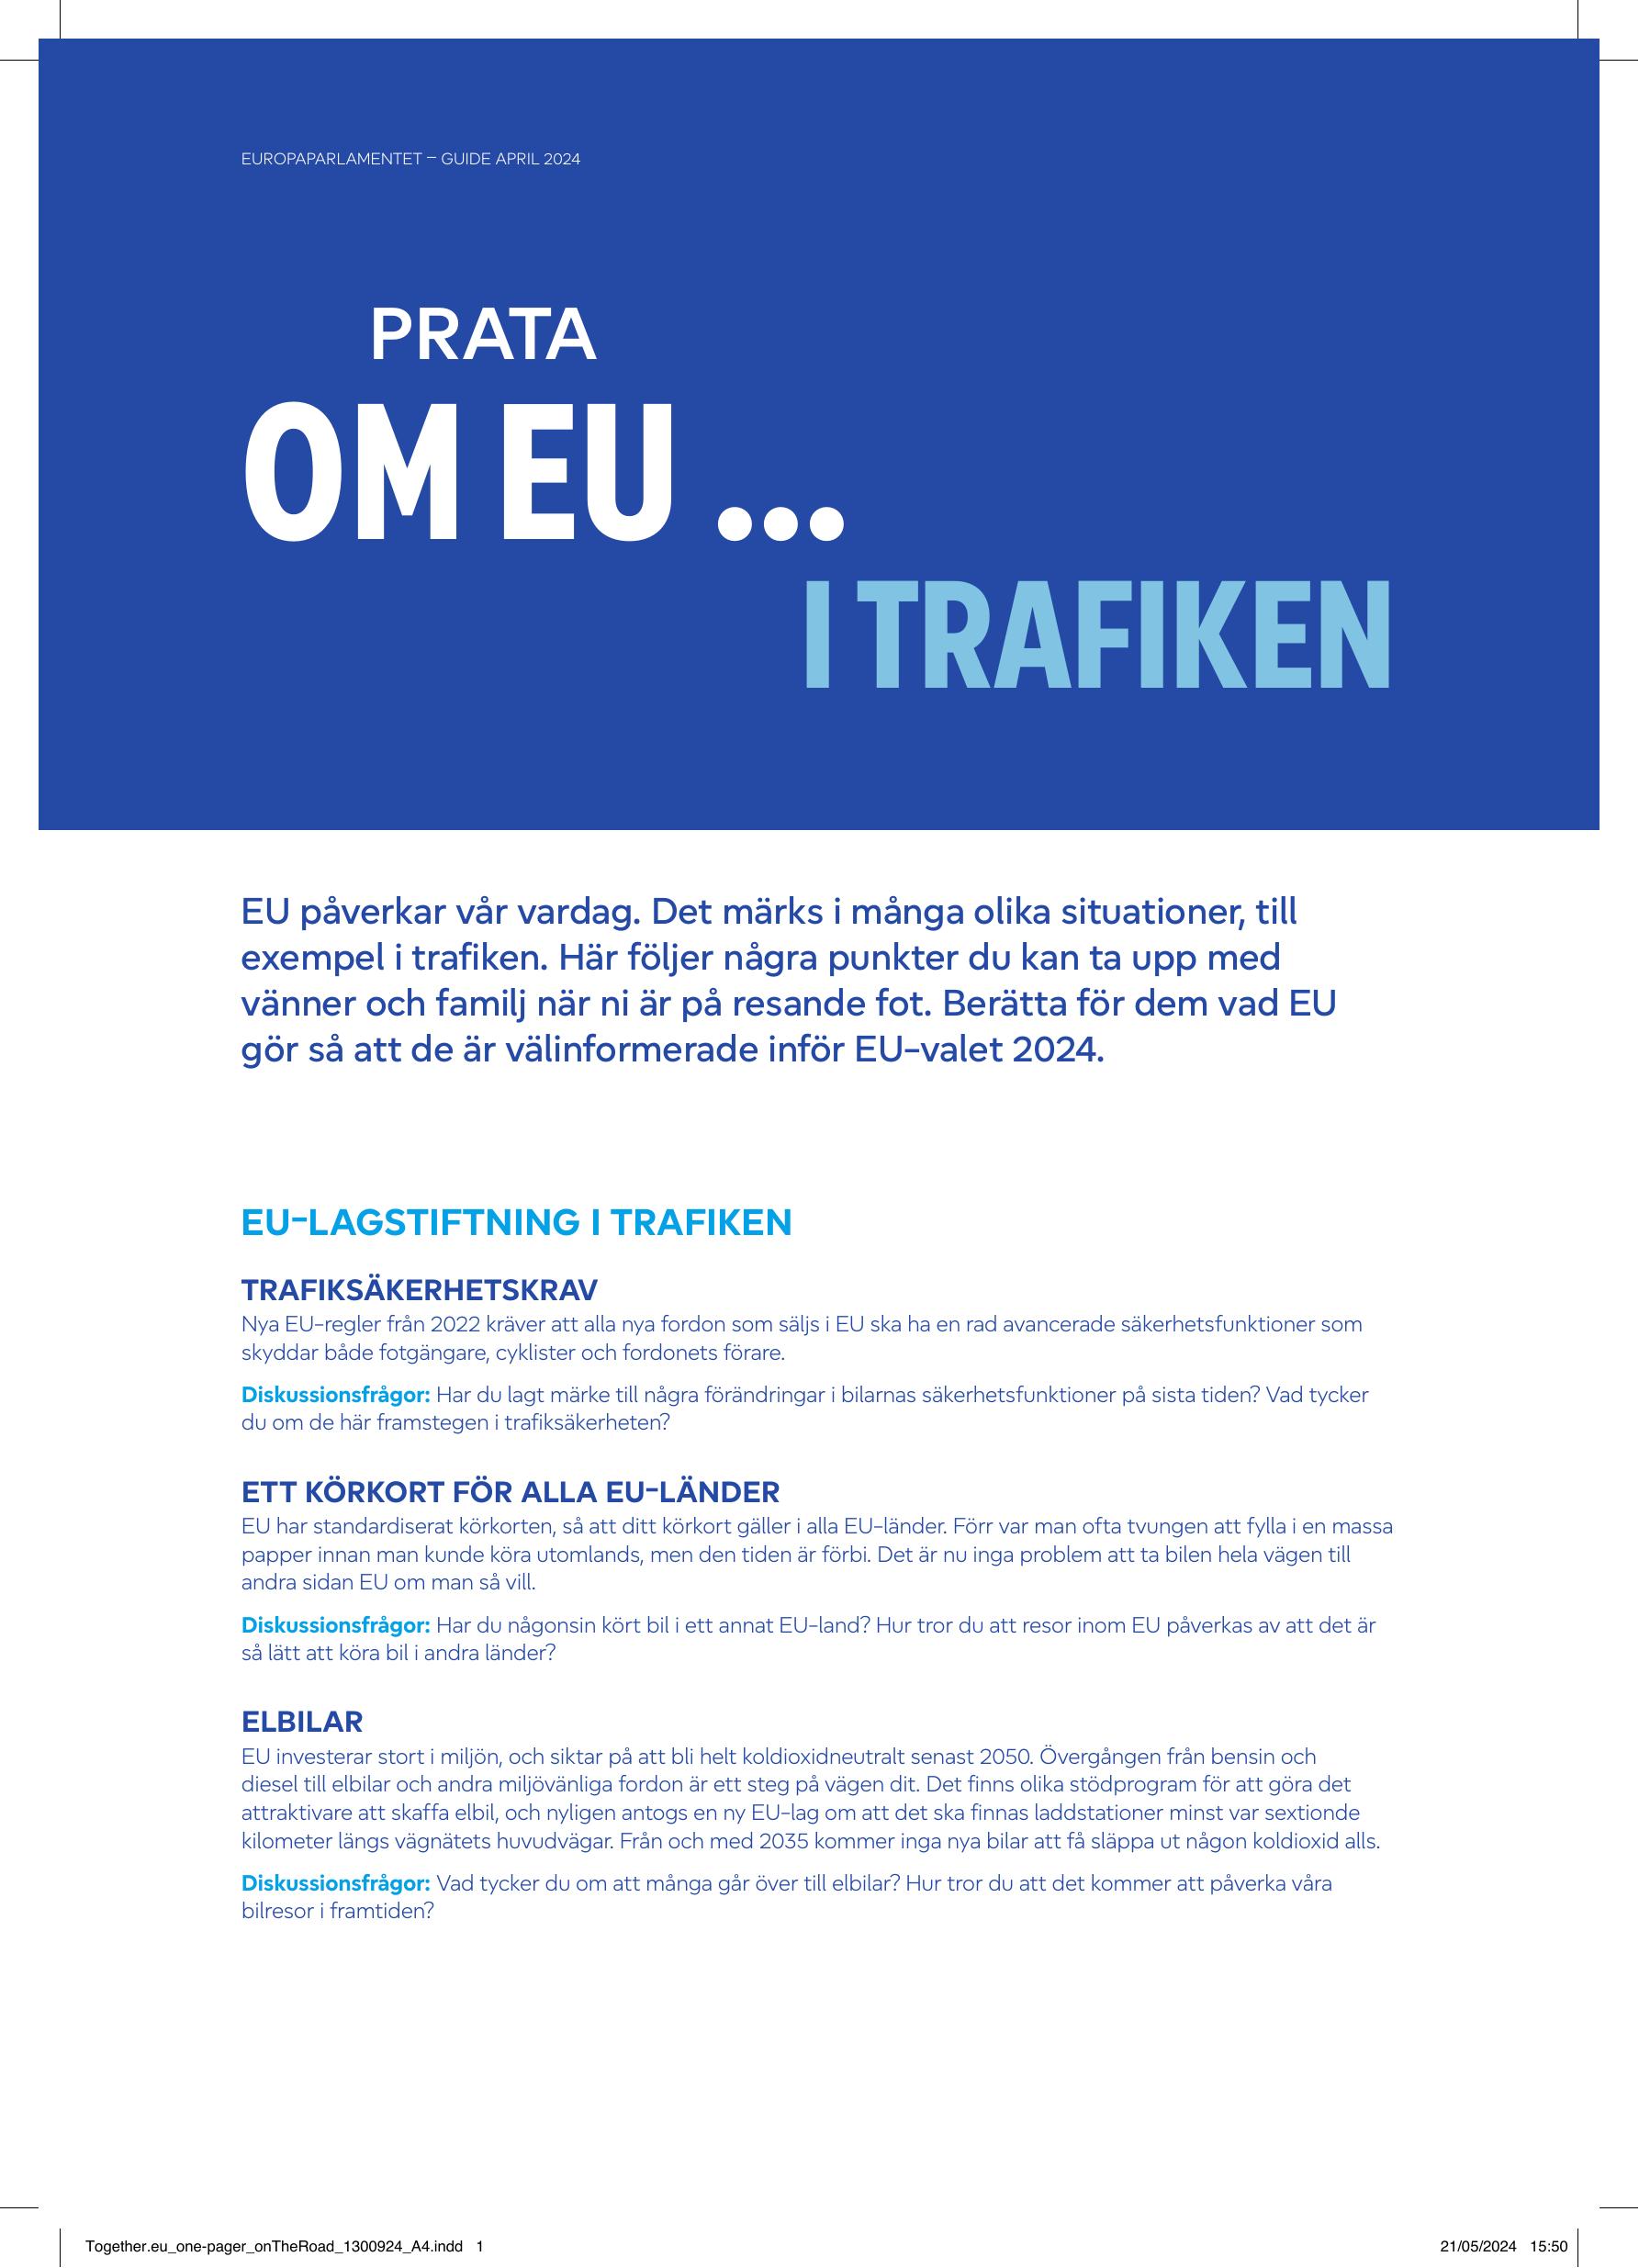 Together.eu_one-pager_onTheRoad_print.pdf